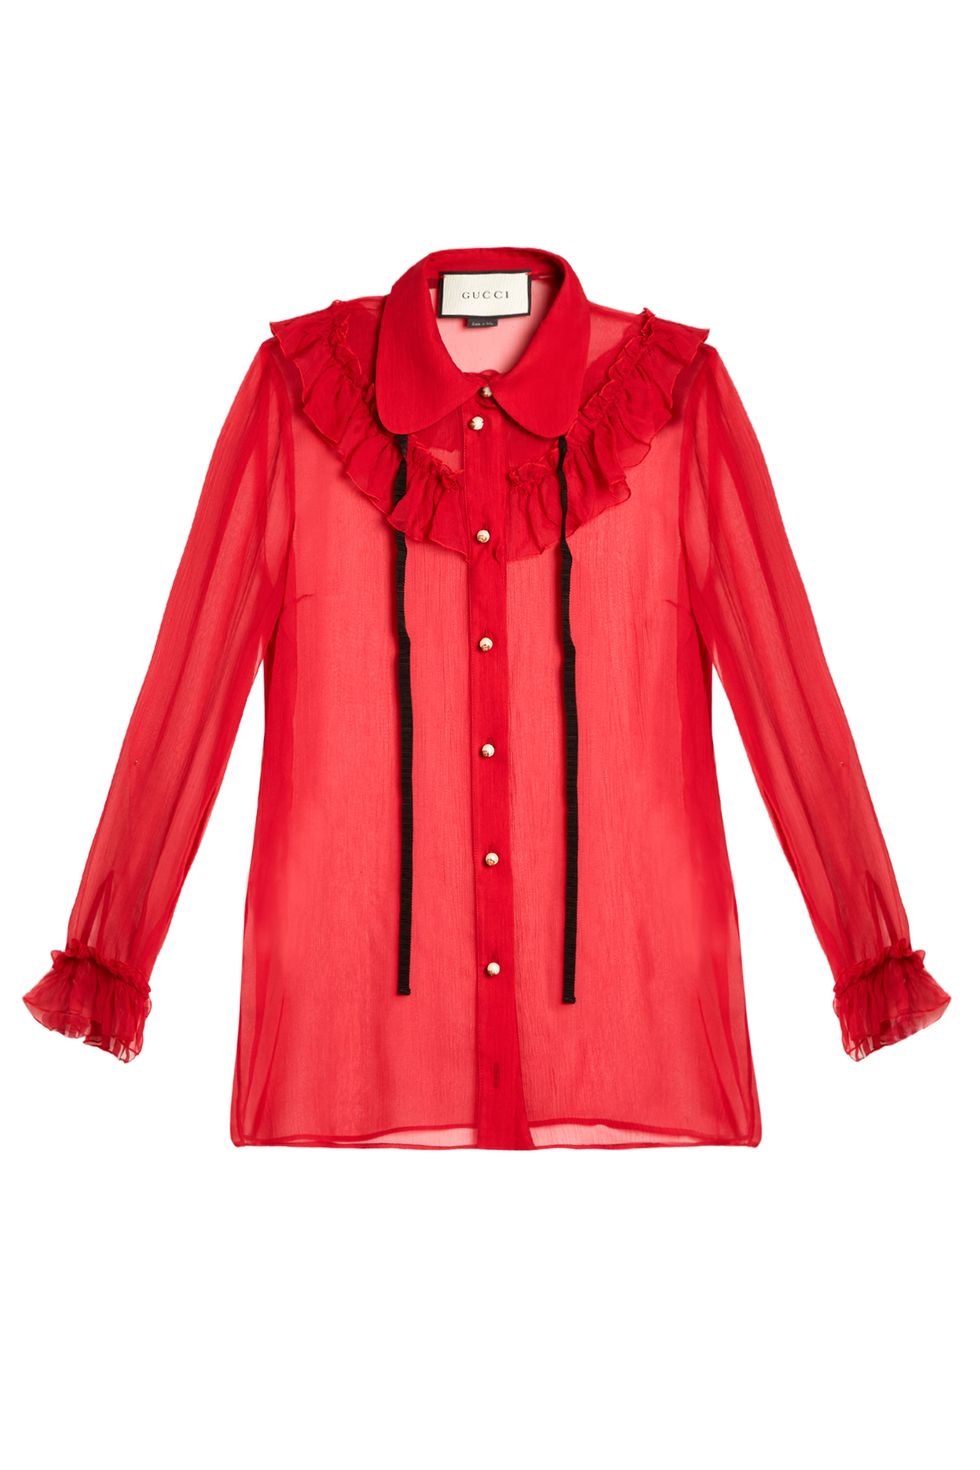 ruffled blouses, romantic blouses, pink blouses, red blouses, shirts, tops